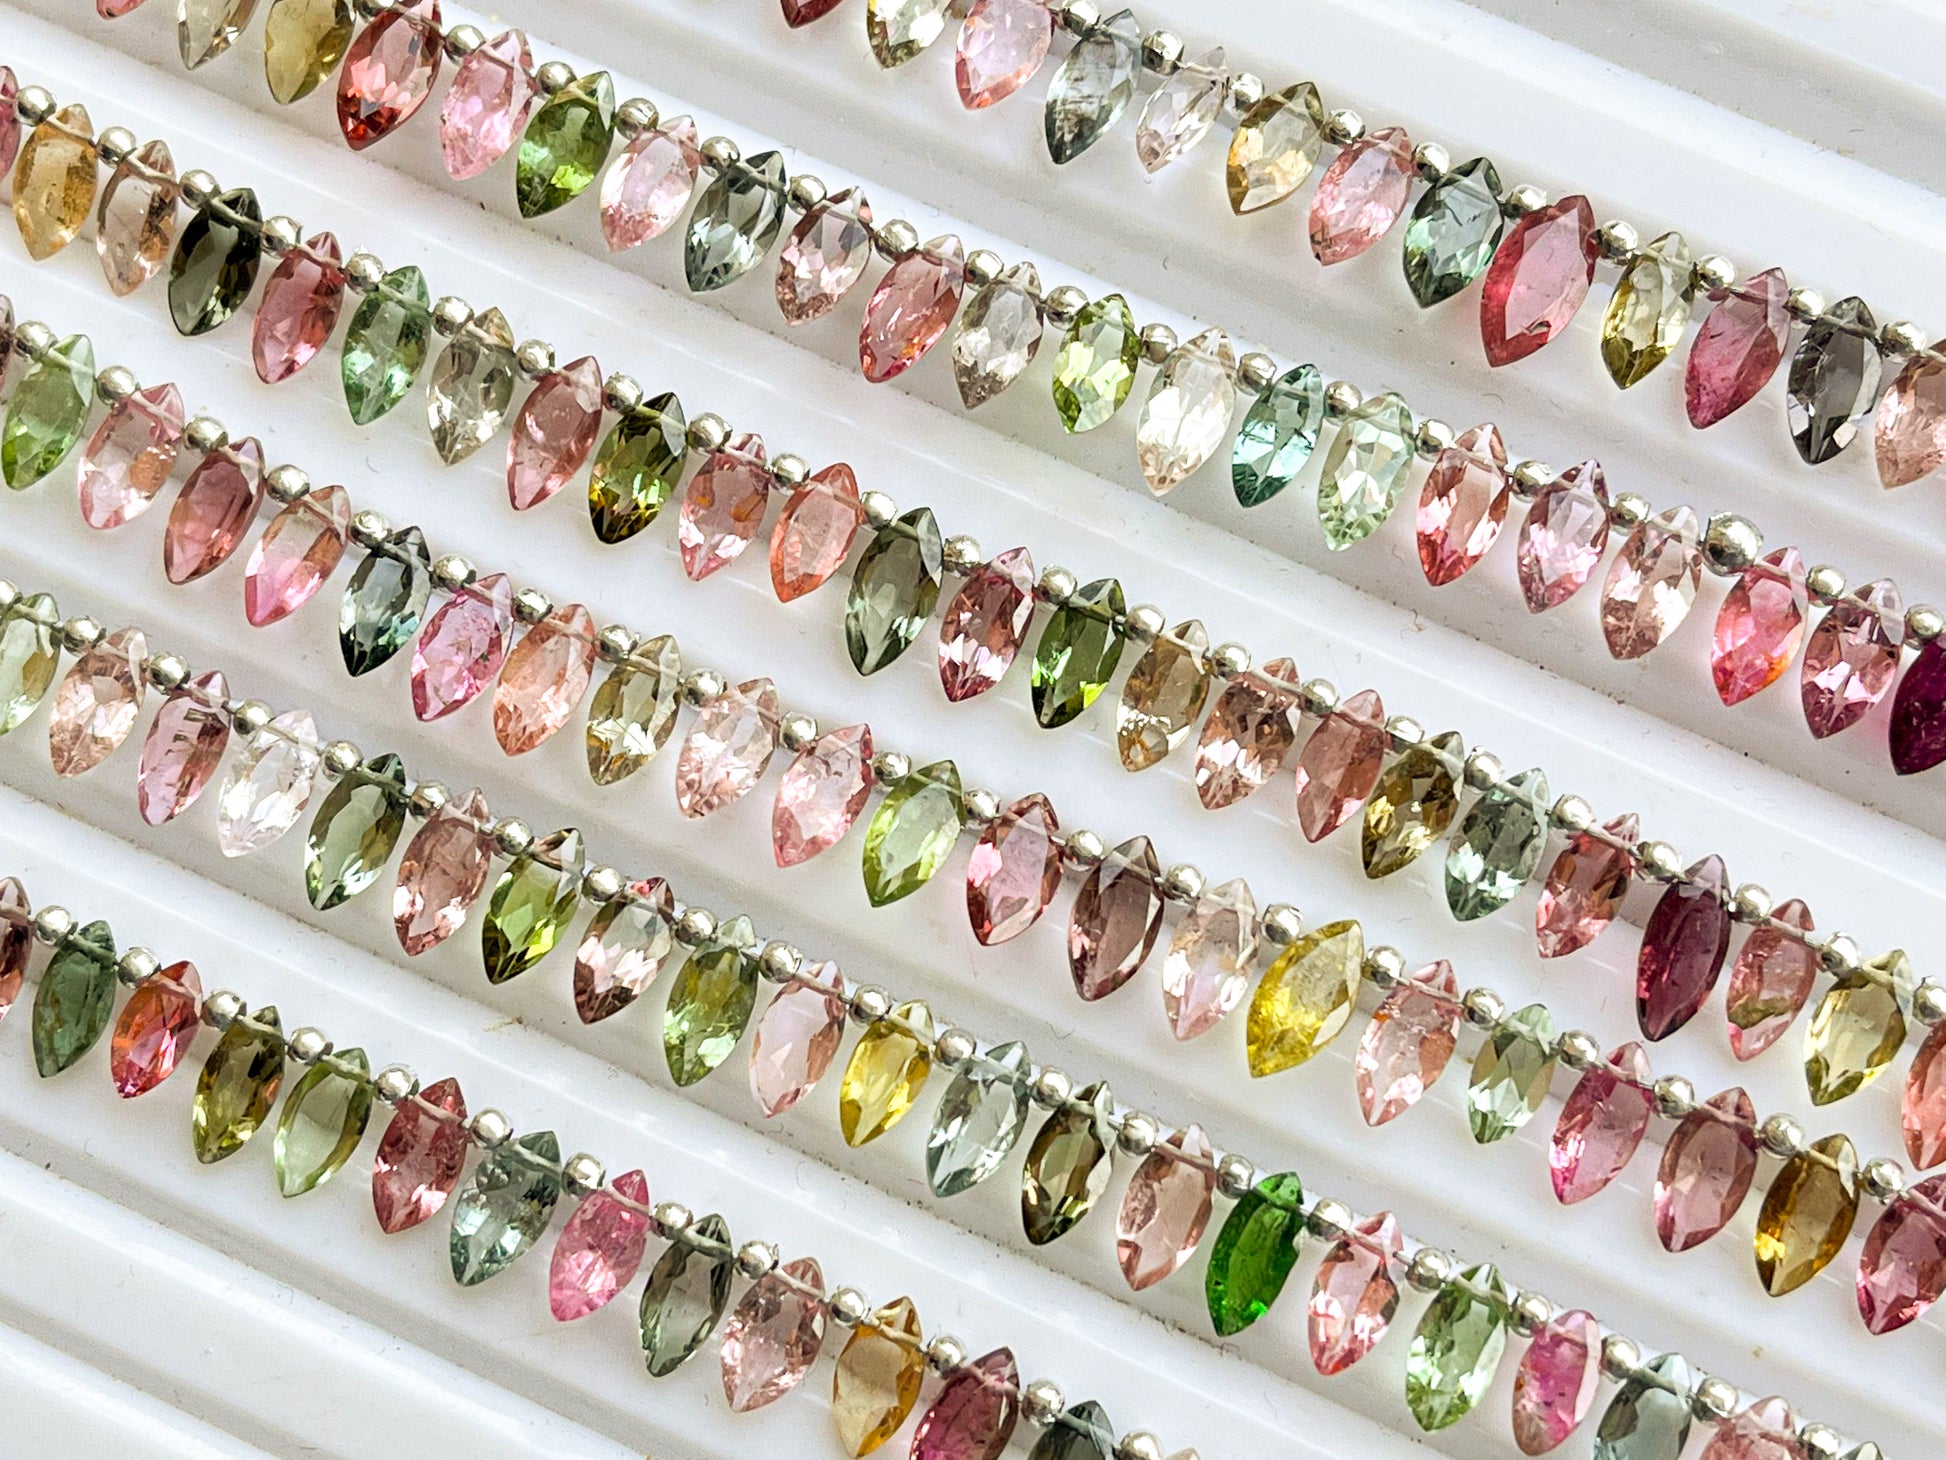 Tourmaline Marquise Shape Cut Stone Beads | 30 Pieces Beadsforyourjewelry